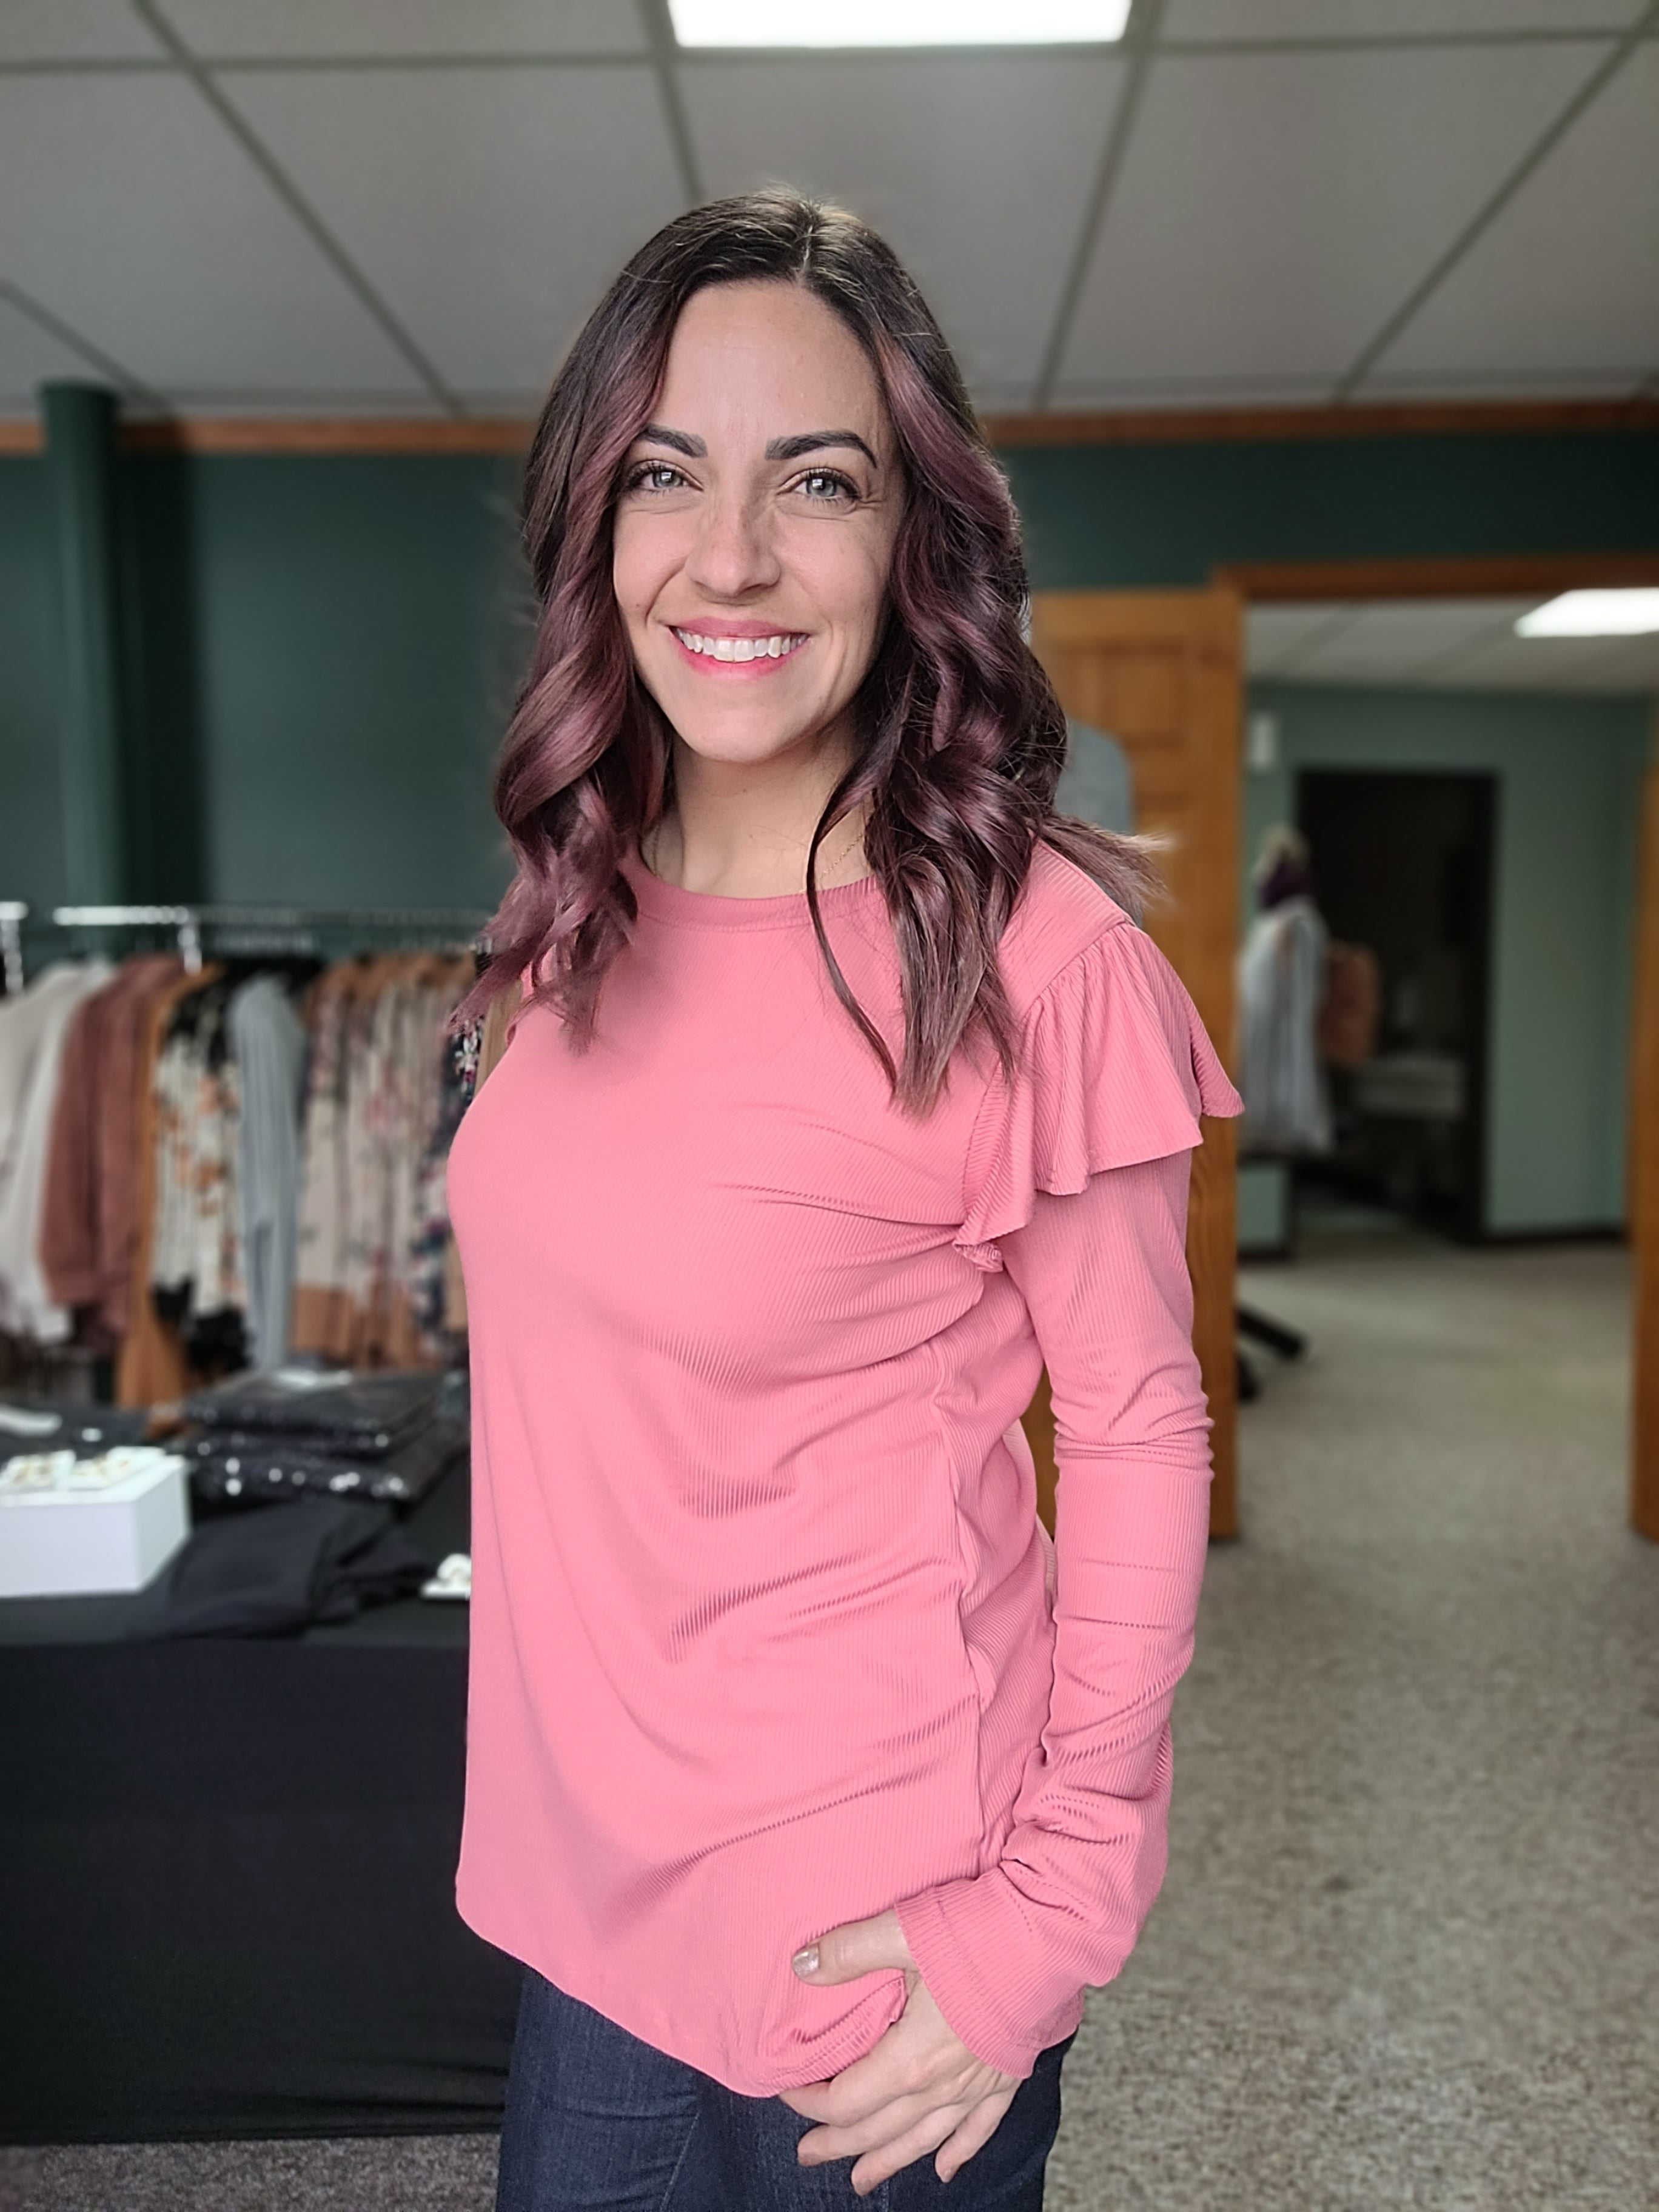 Shop Coral Dreams Ruffle Top-Shirts & Tops at Ruby Joy Boutique, a Women's Clothing Store in Pickerington, Ohio